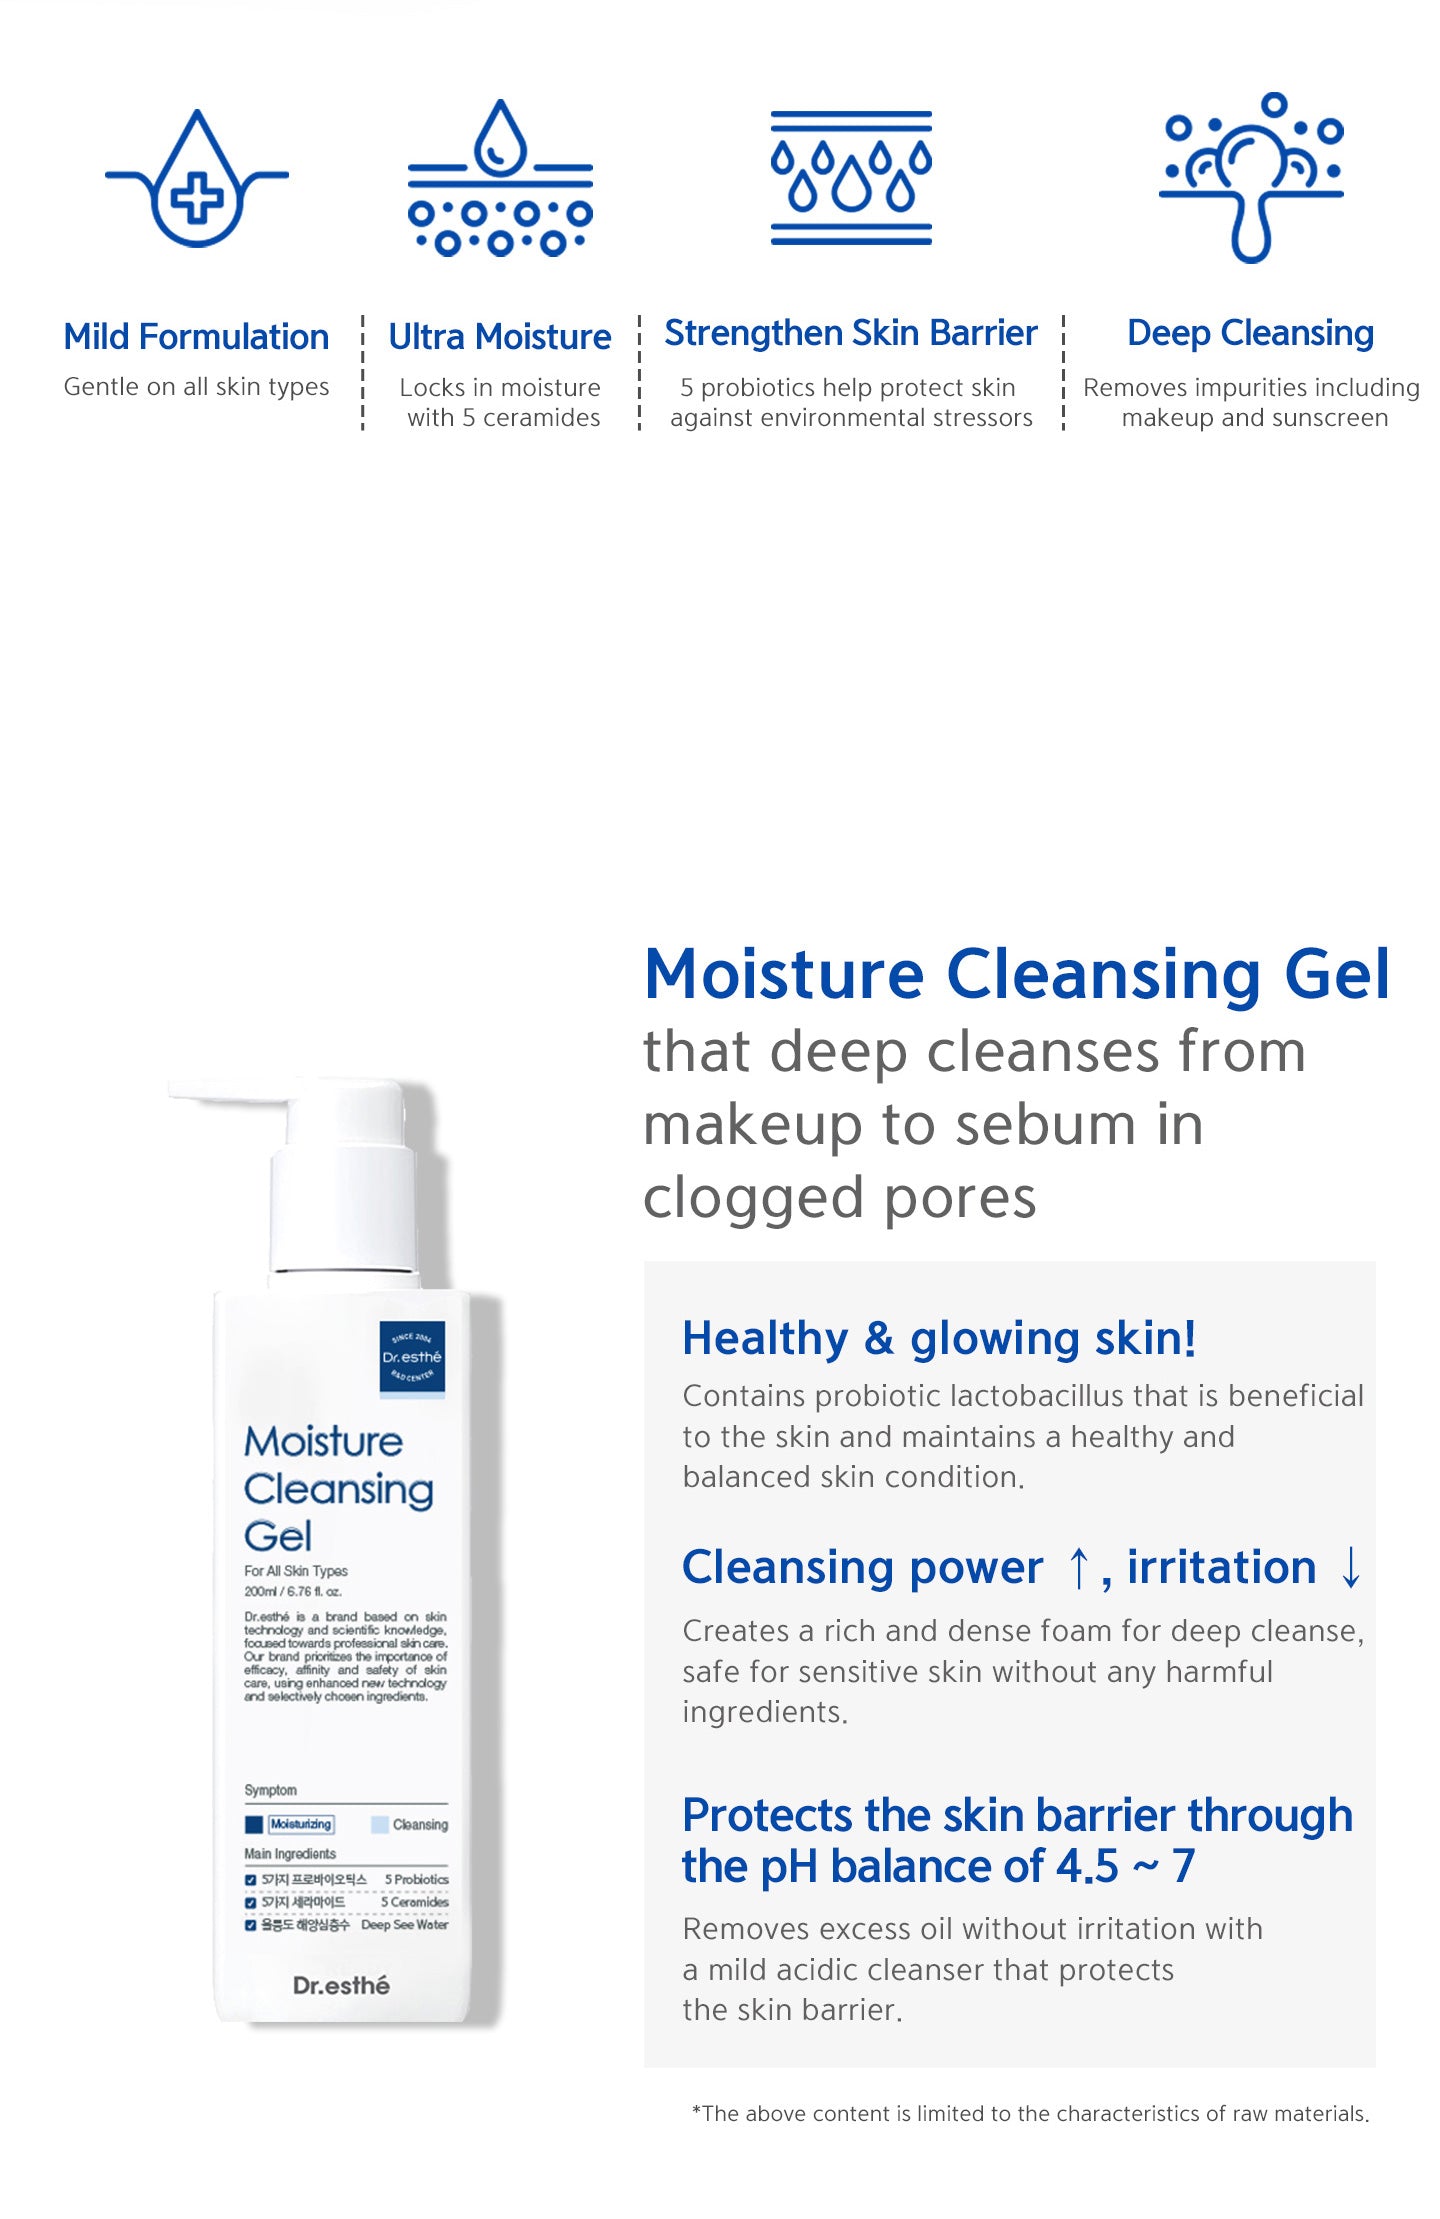 Moisture cleansing gel that deep cleanses from makeup to sebum in clogged pores. Healthy & glowing skin. Increase cleansing power, decrease irritation. Protects the skin barrier through the pH balance of 4.5~7. Mild formulation, ultra moisture 